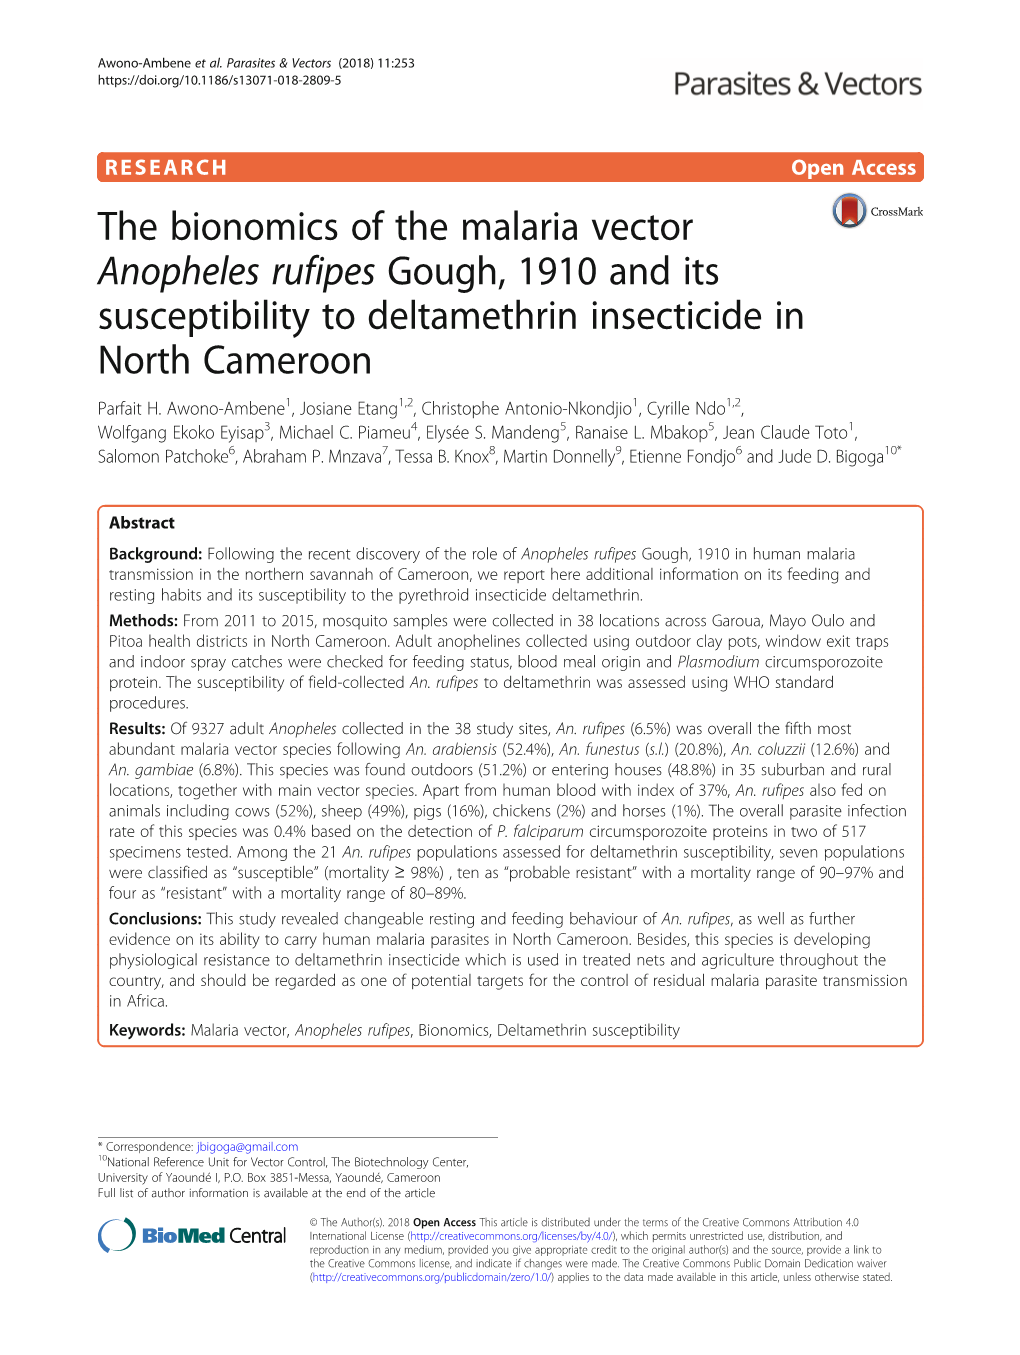 The Bionomics of the Malaria Vector Anopheles Rufipes Gough, 1910 and Its Susceptibility to Deltamethrin Insecticide in North Cameroon Parfait H